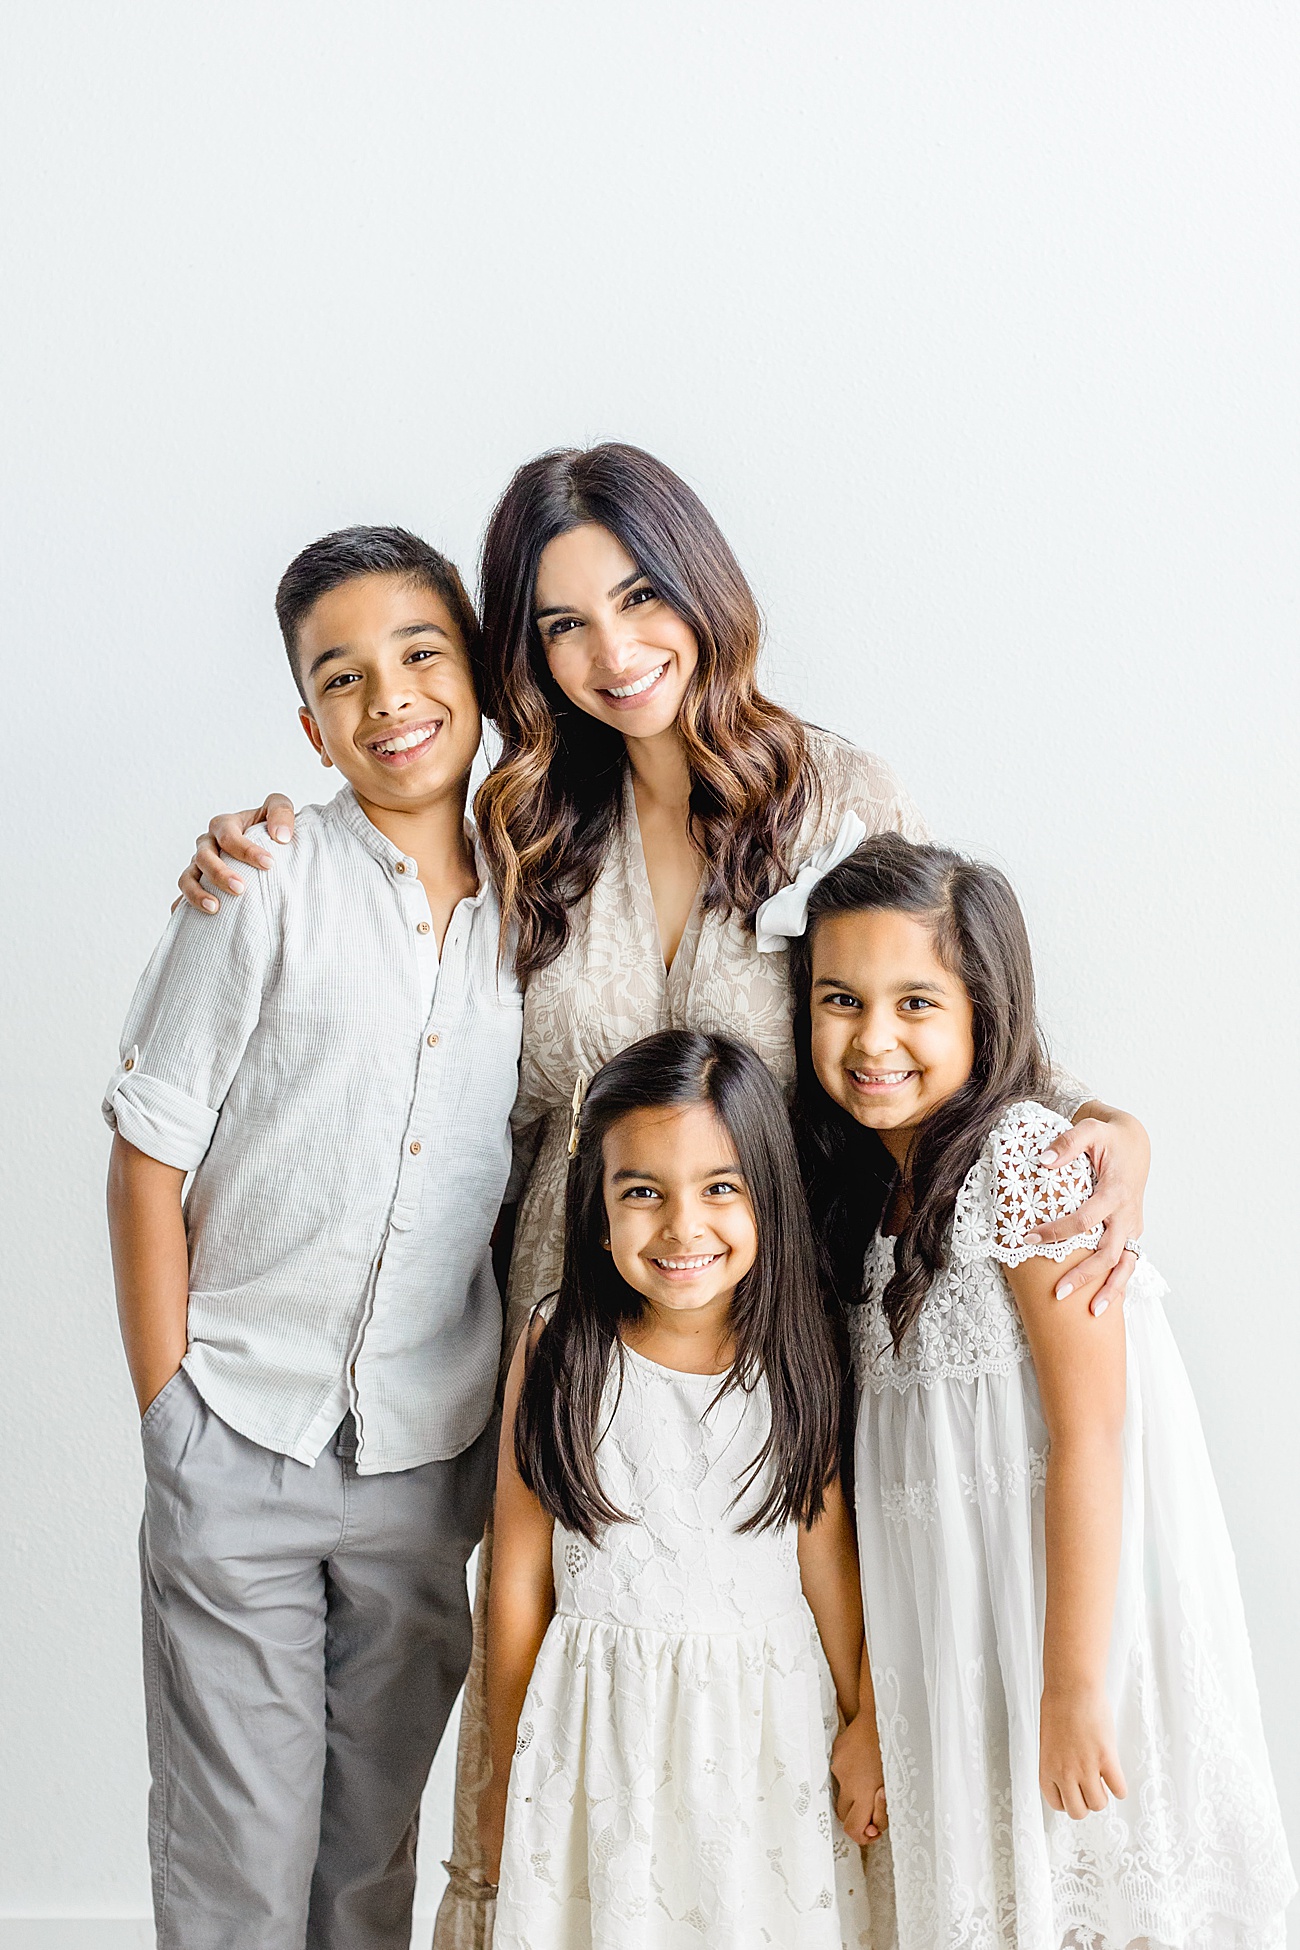 Beautoful portrait of Mom, Nasreen from the blog Hey Nasreen, with her children. Photo by Sana Ahmed Photography.